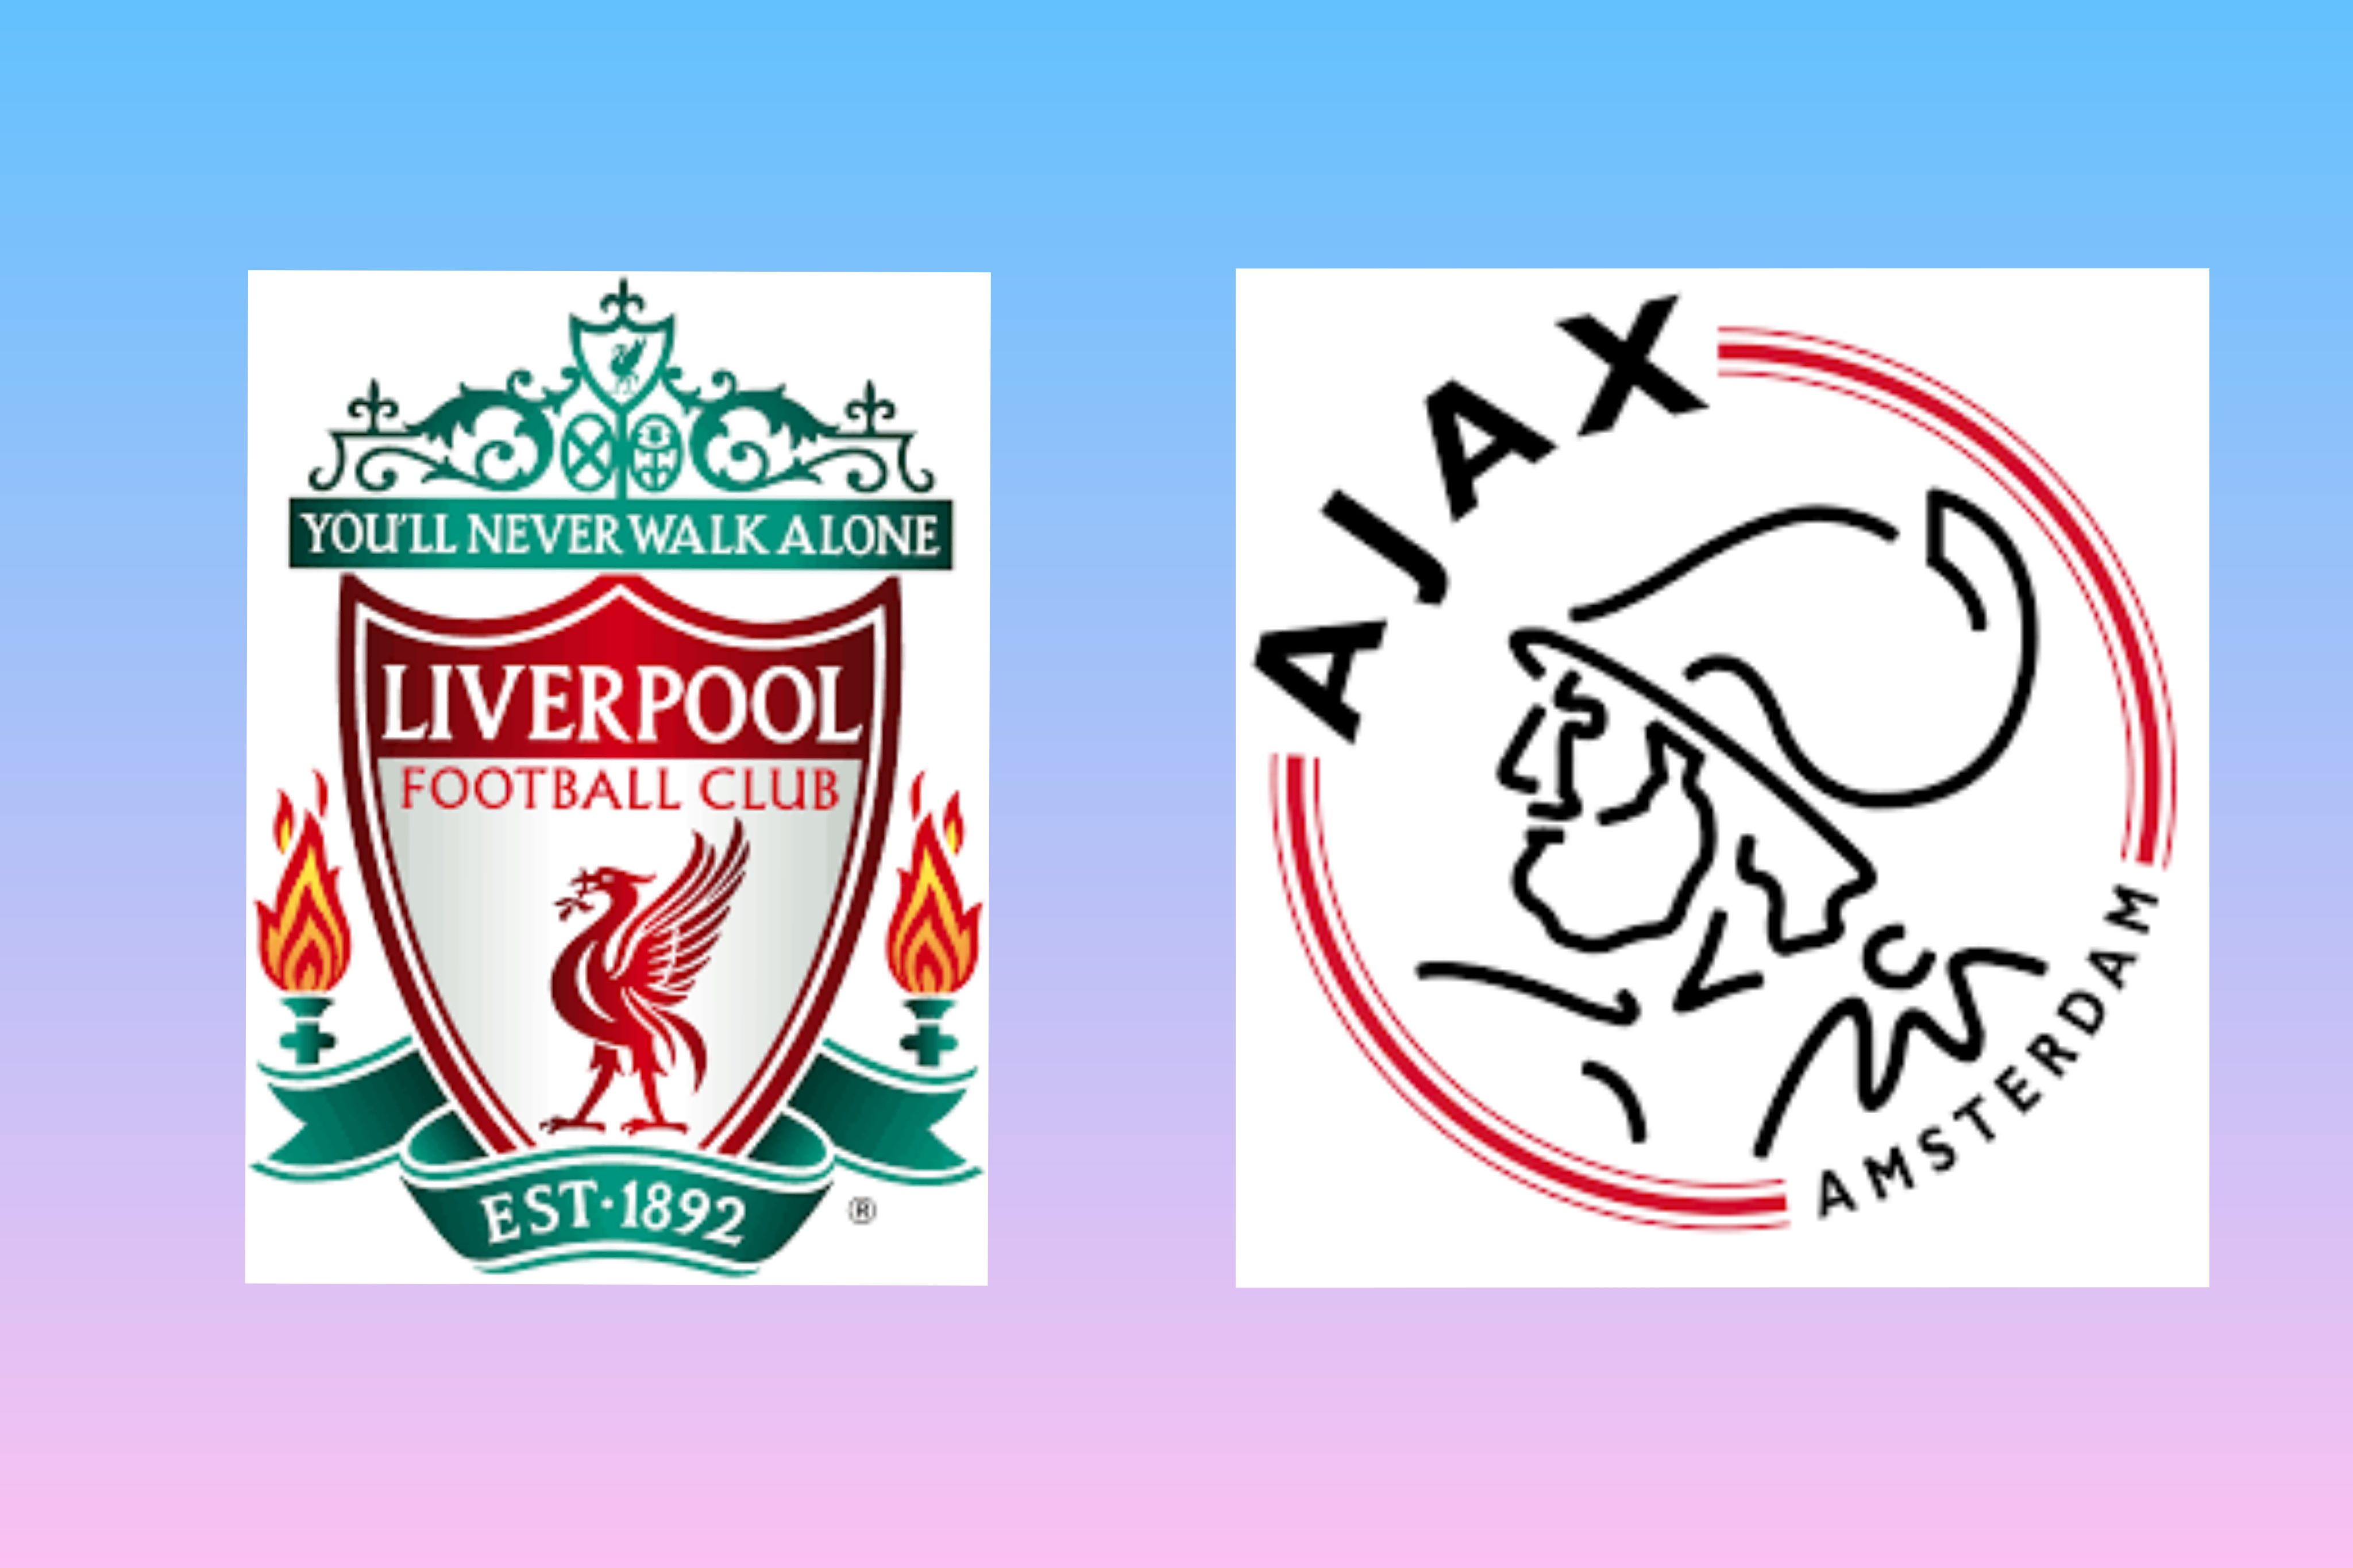 Liverpool vs Ajax Prediction: Statistical Analysis of Goals, Fouls and Winner